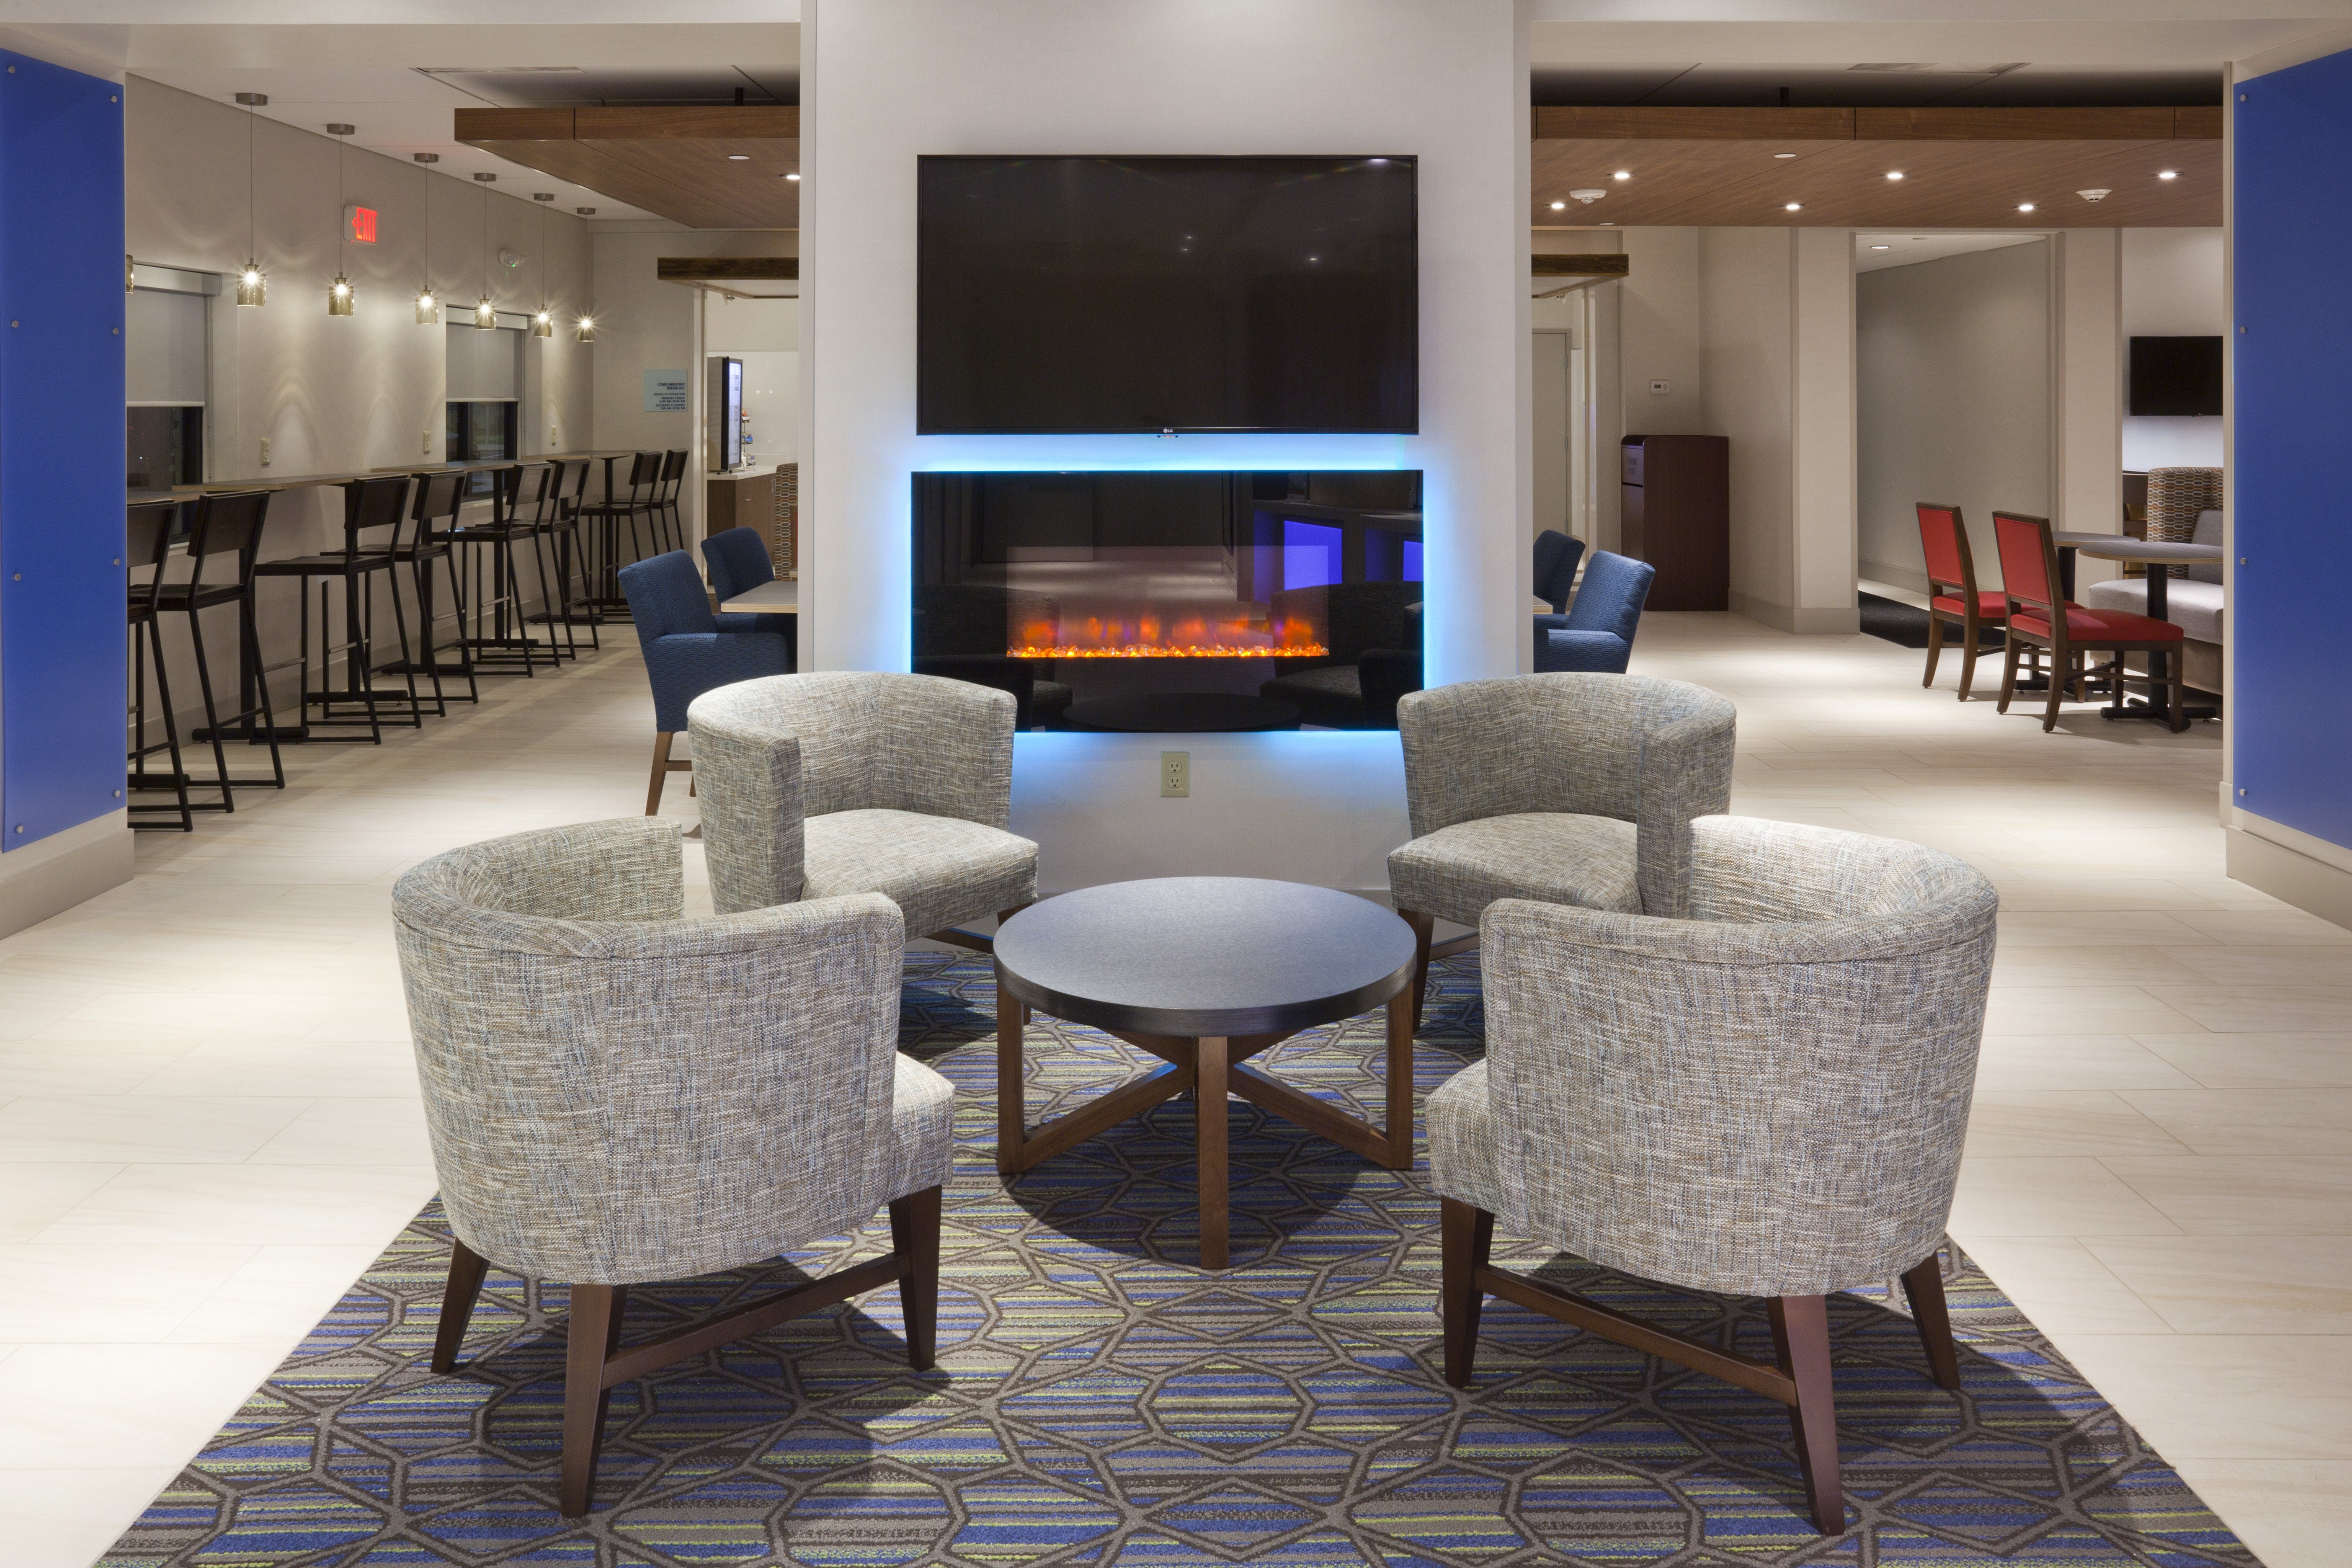 Our modern Roseville hotel lobby has comfy seating and fireplace.